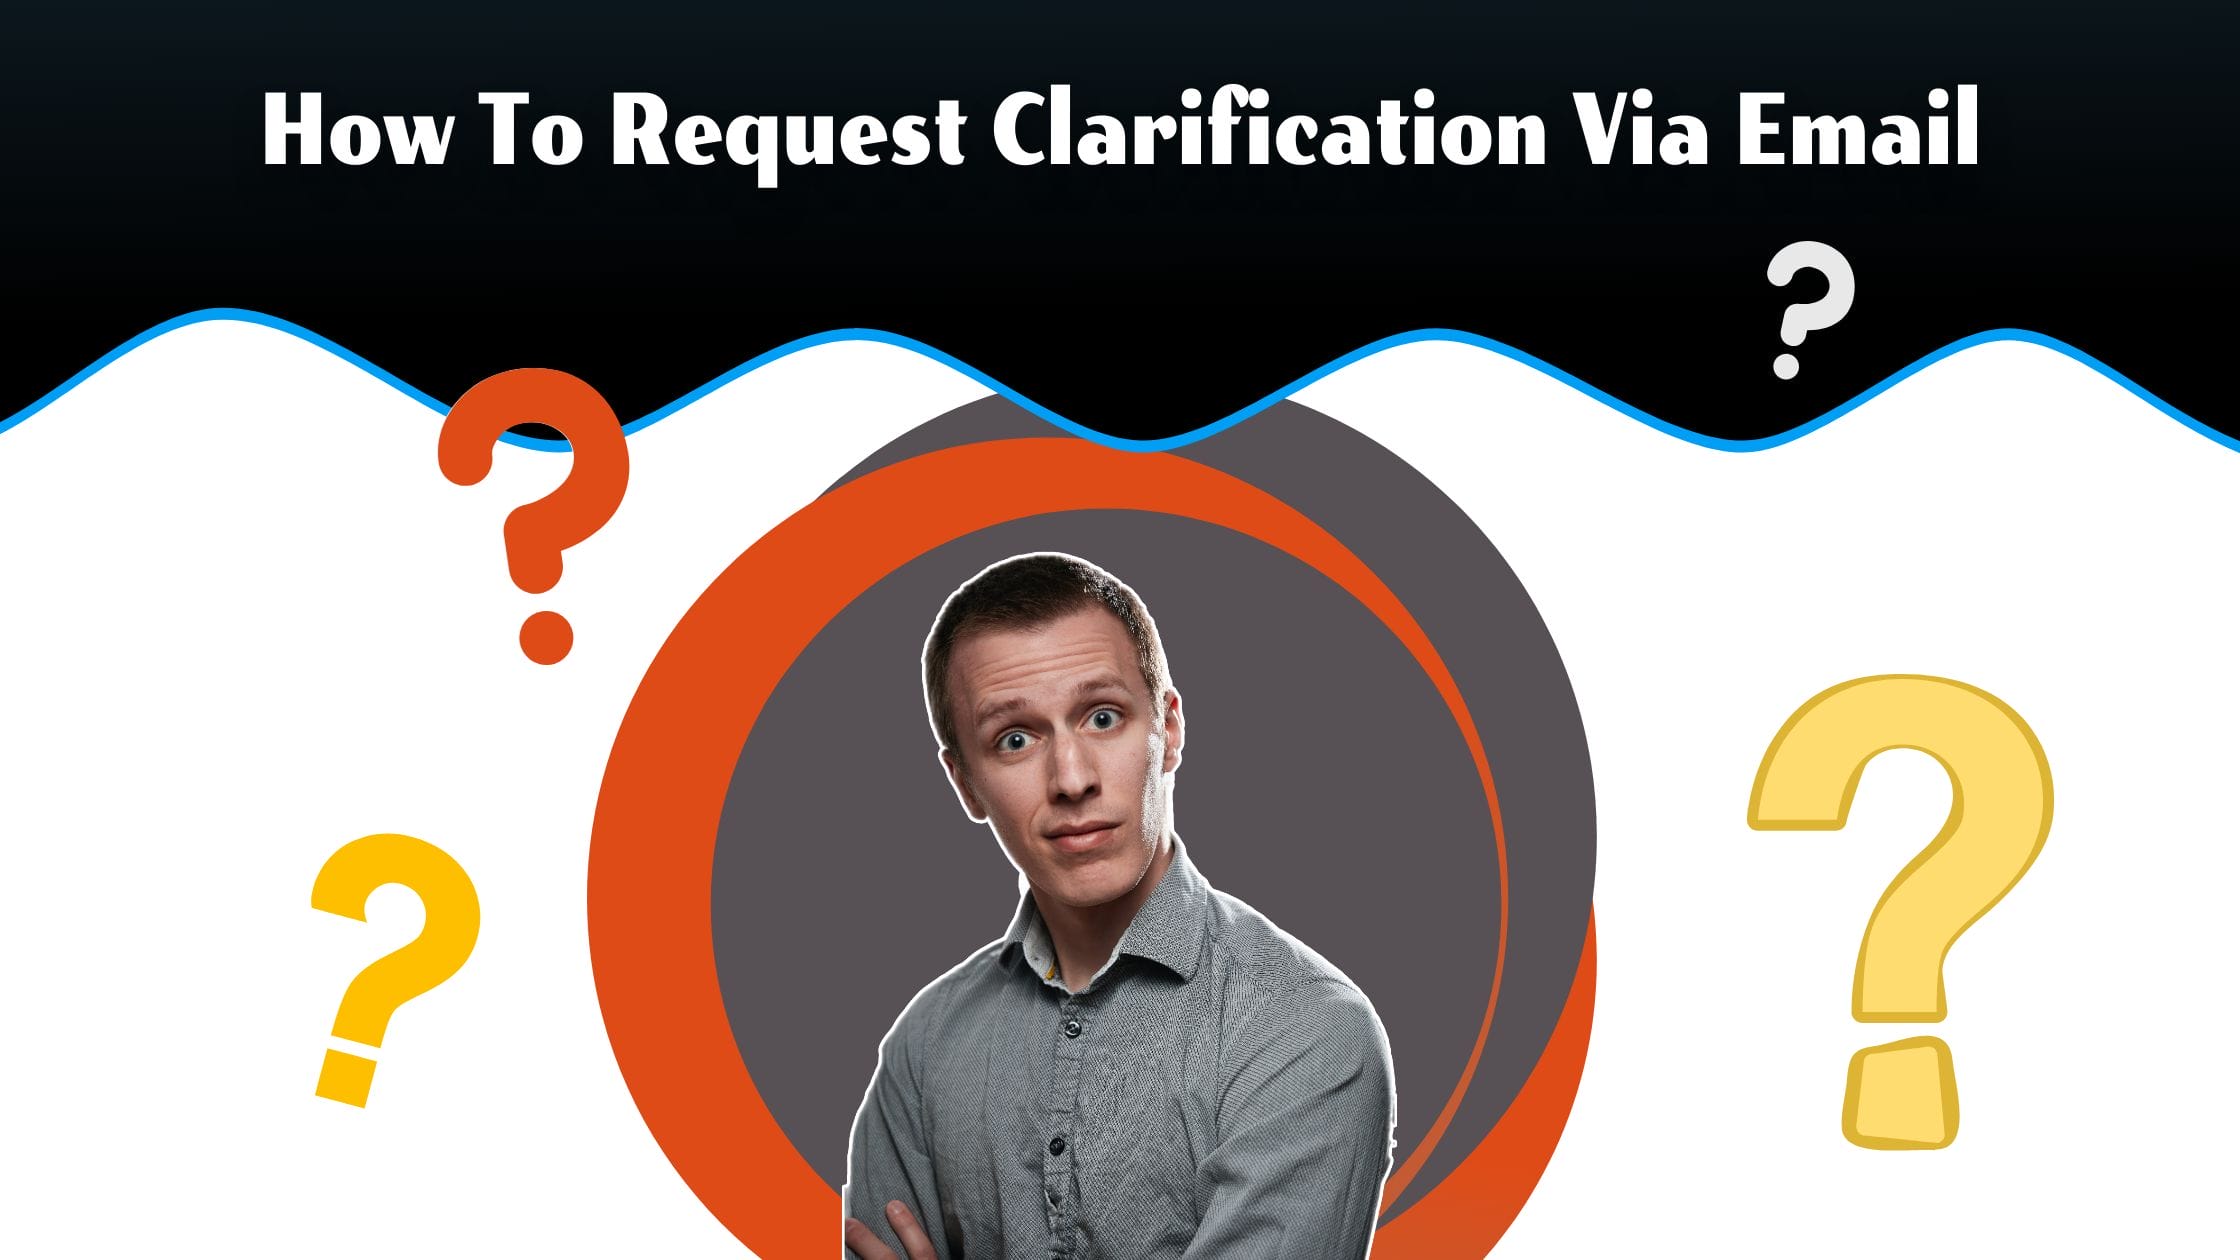 How To Request Clarification Via Email